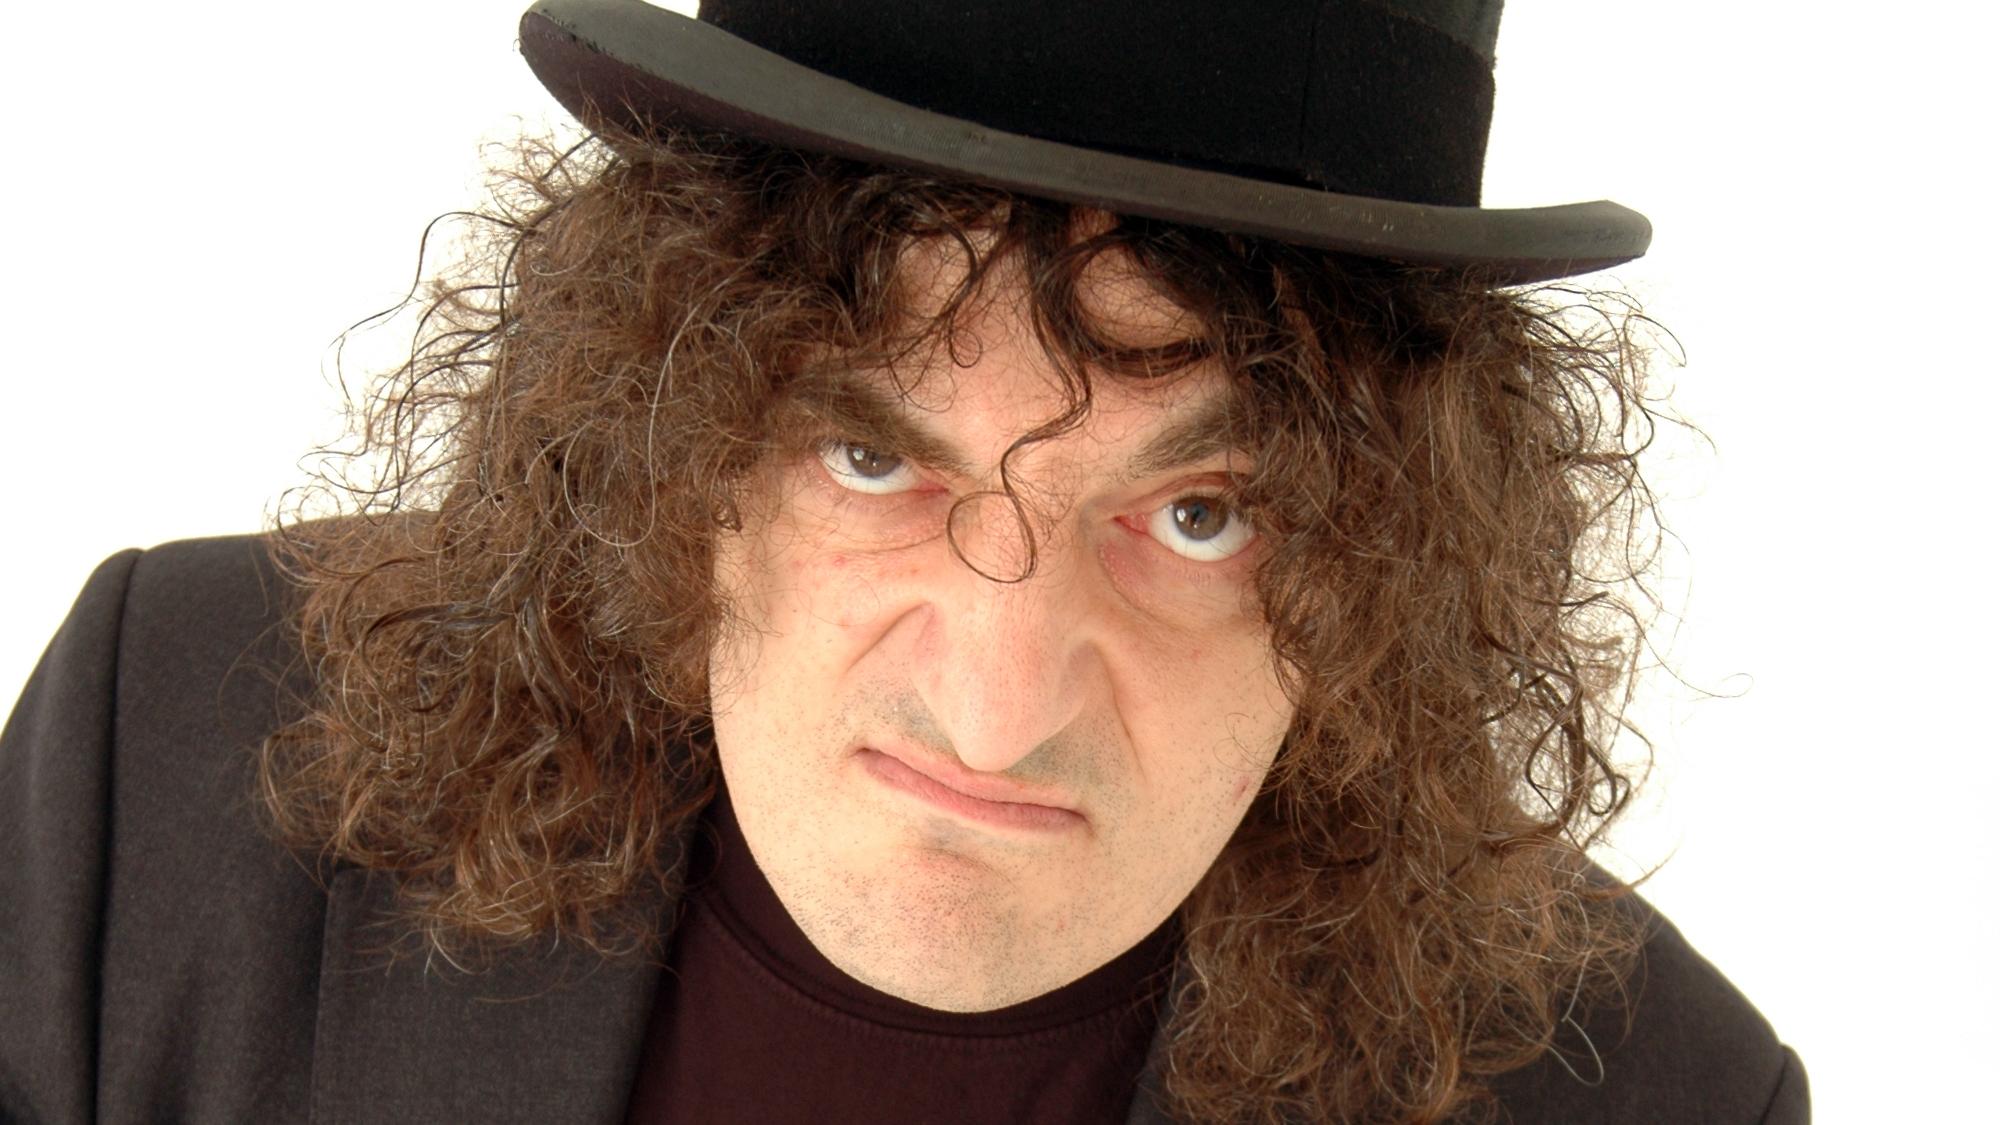 Jerry Sadowitz  ‘Not For Anyone’